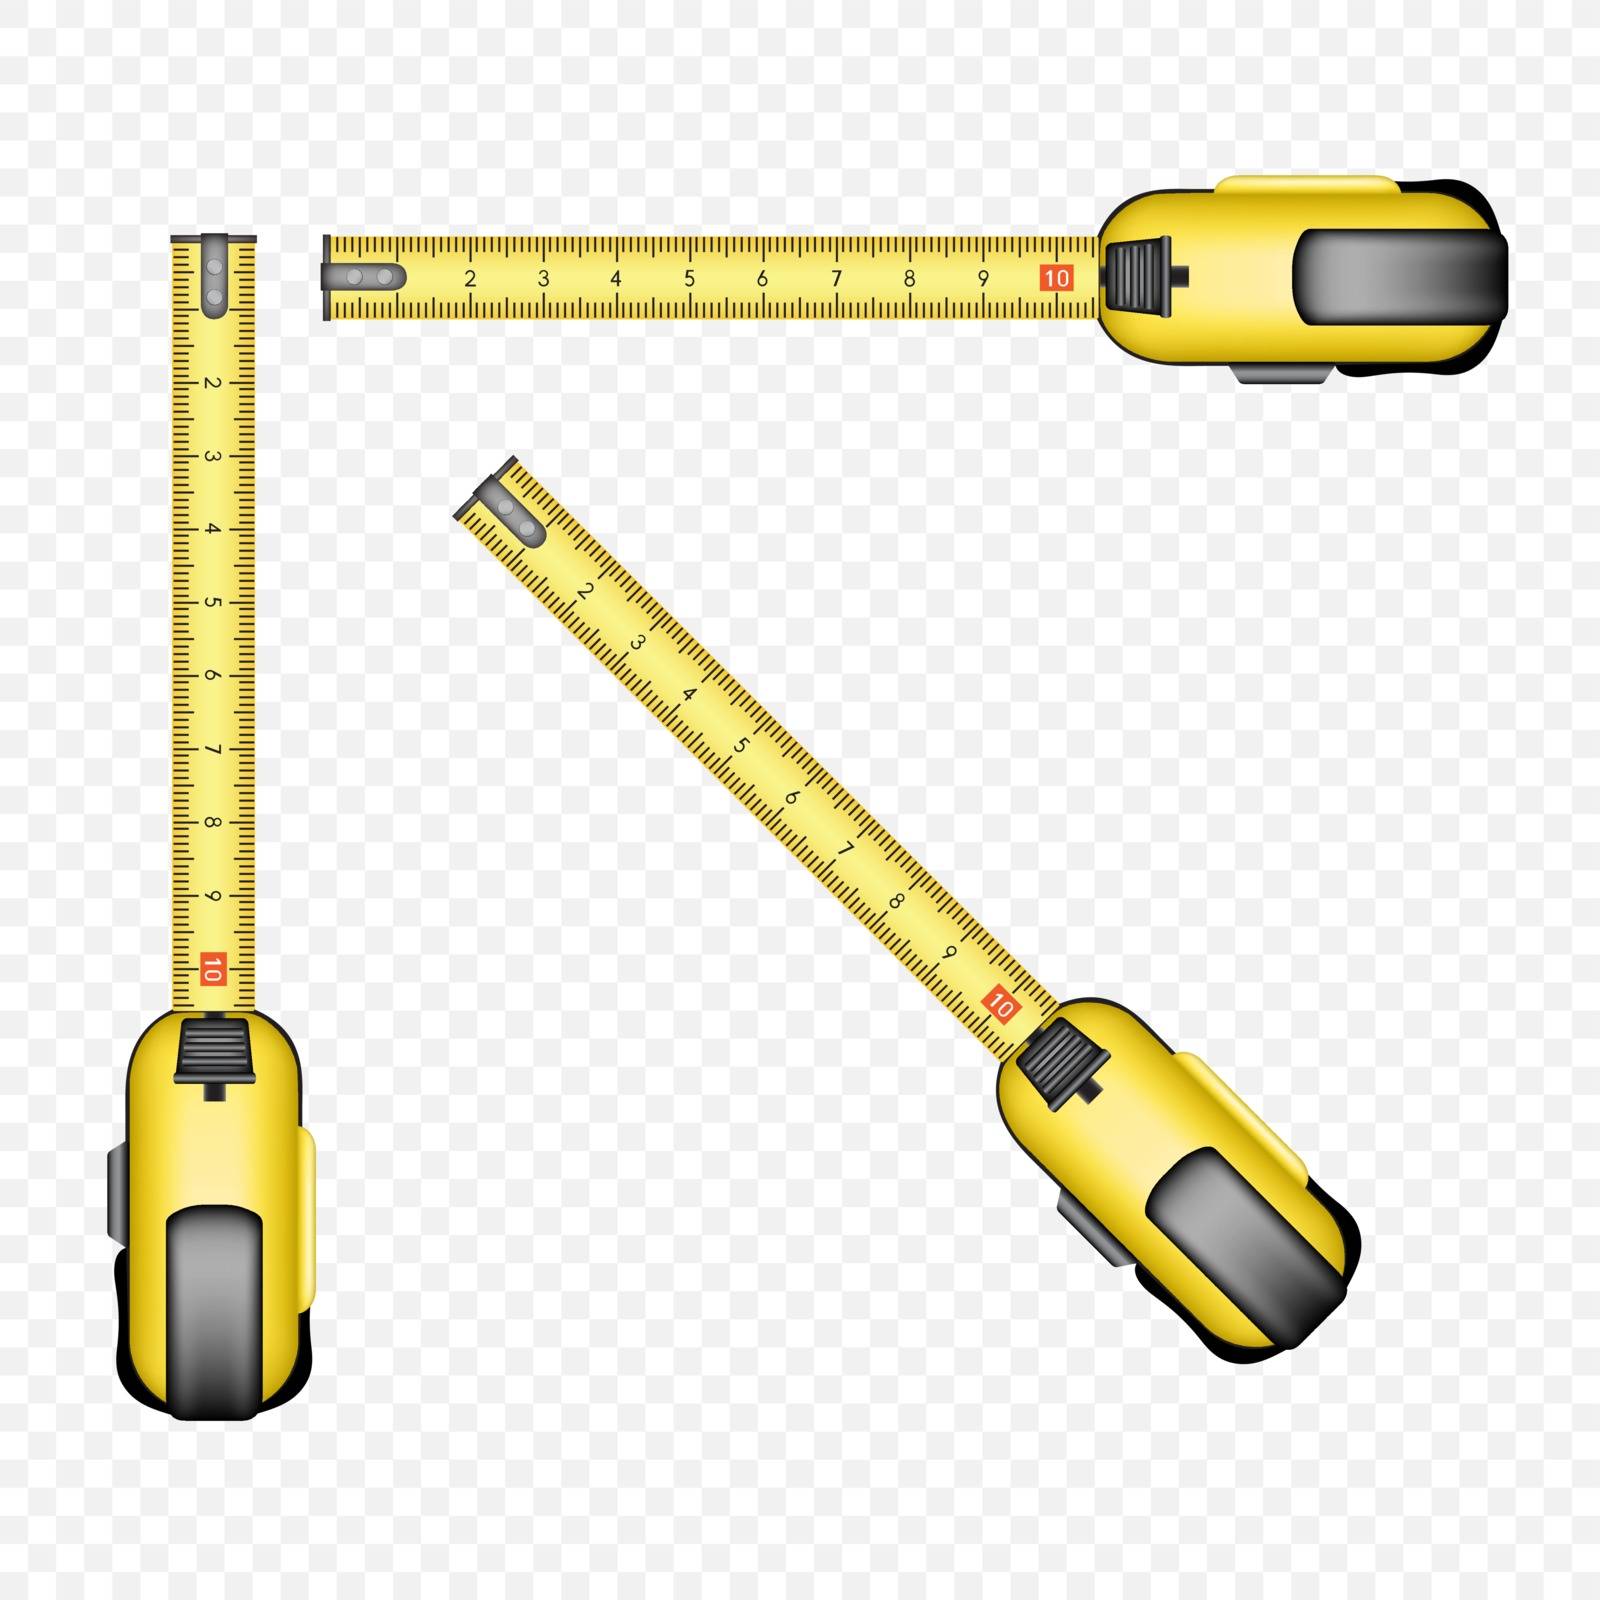 Tape measure tool on transparent background. Hand holding measurements equipment with scale of millimeters and centimeters